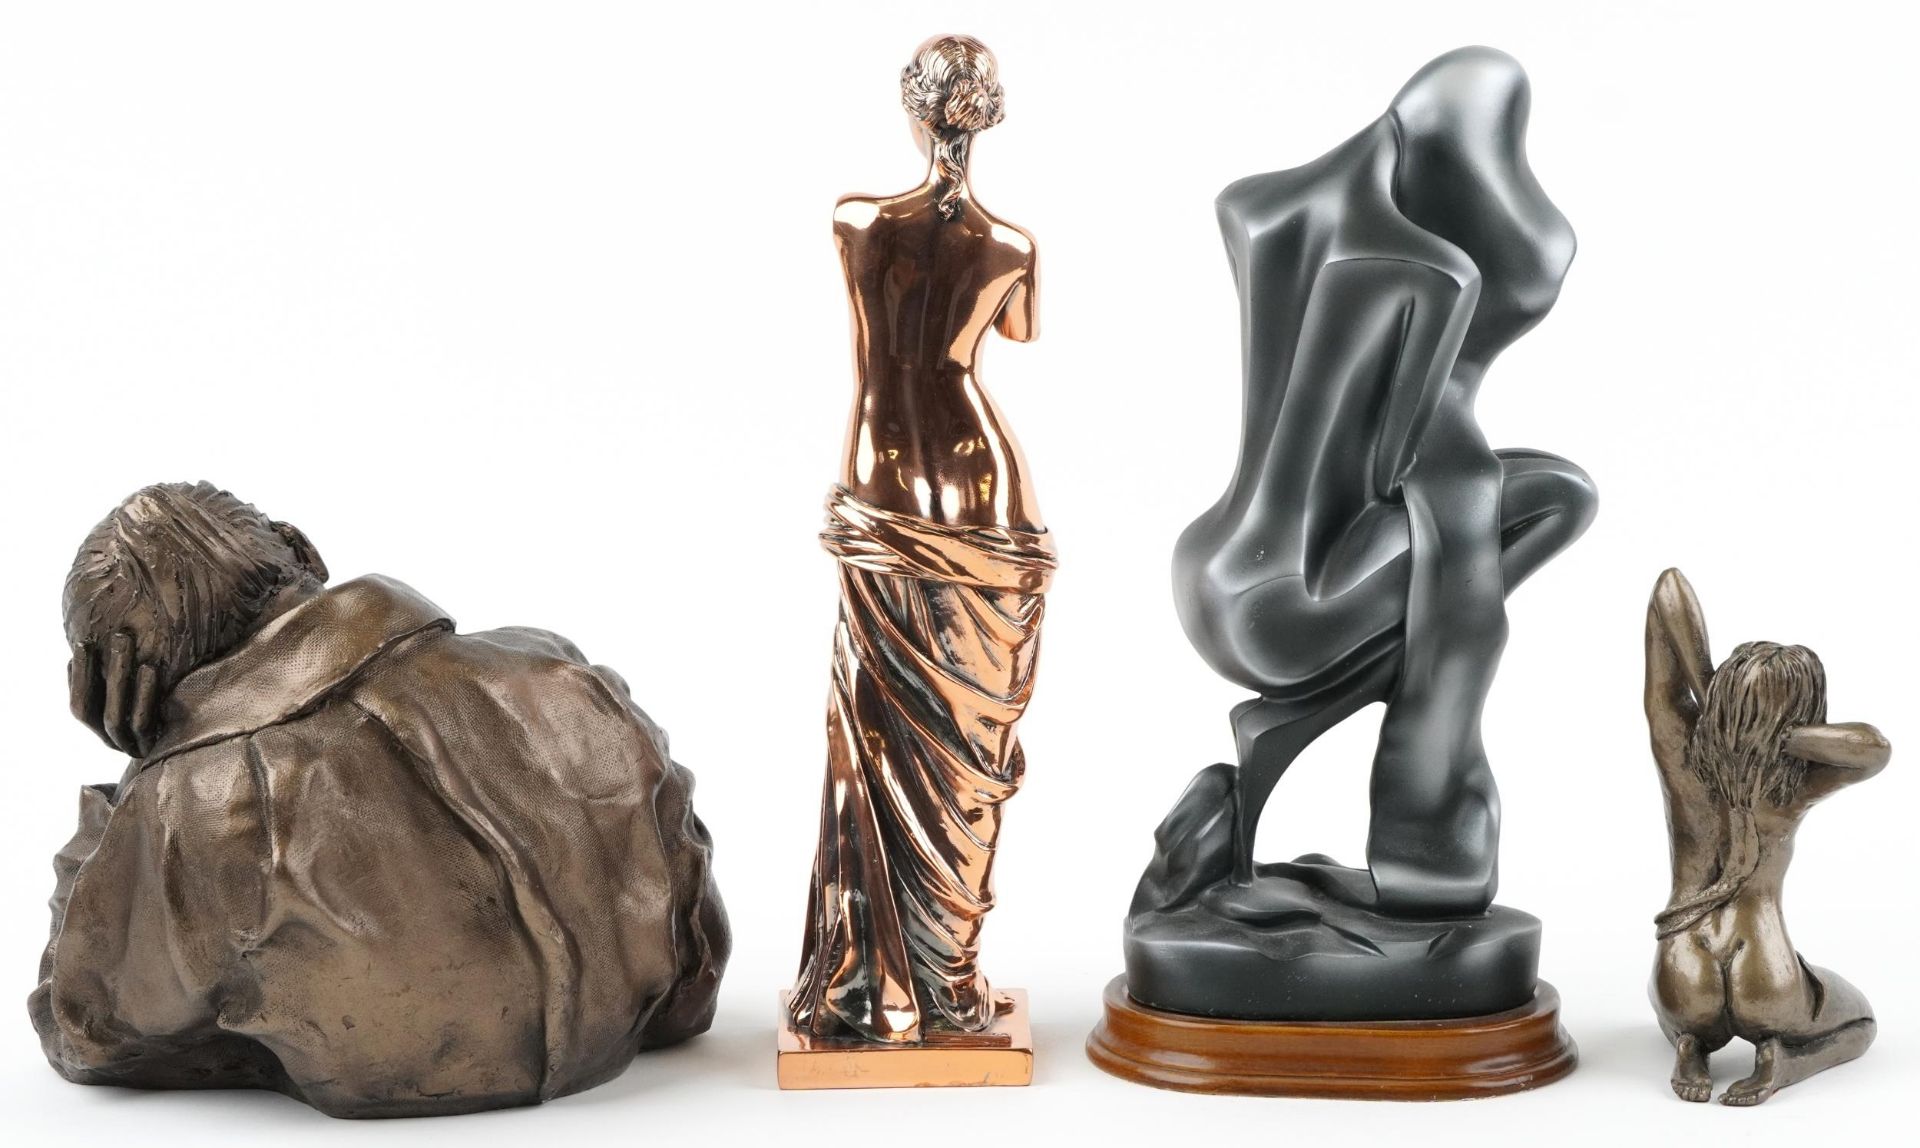 Classical and decorative figures including a bronzed statue of Mona Lisa and a Modernist sculpture - Image 2 of 5